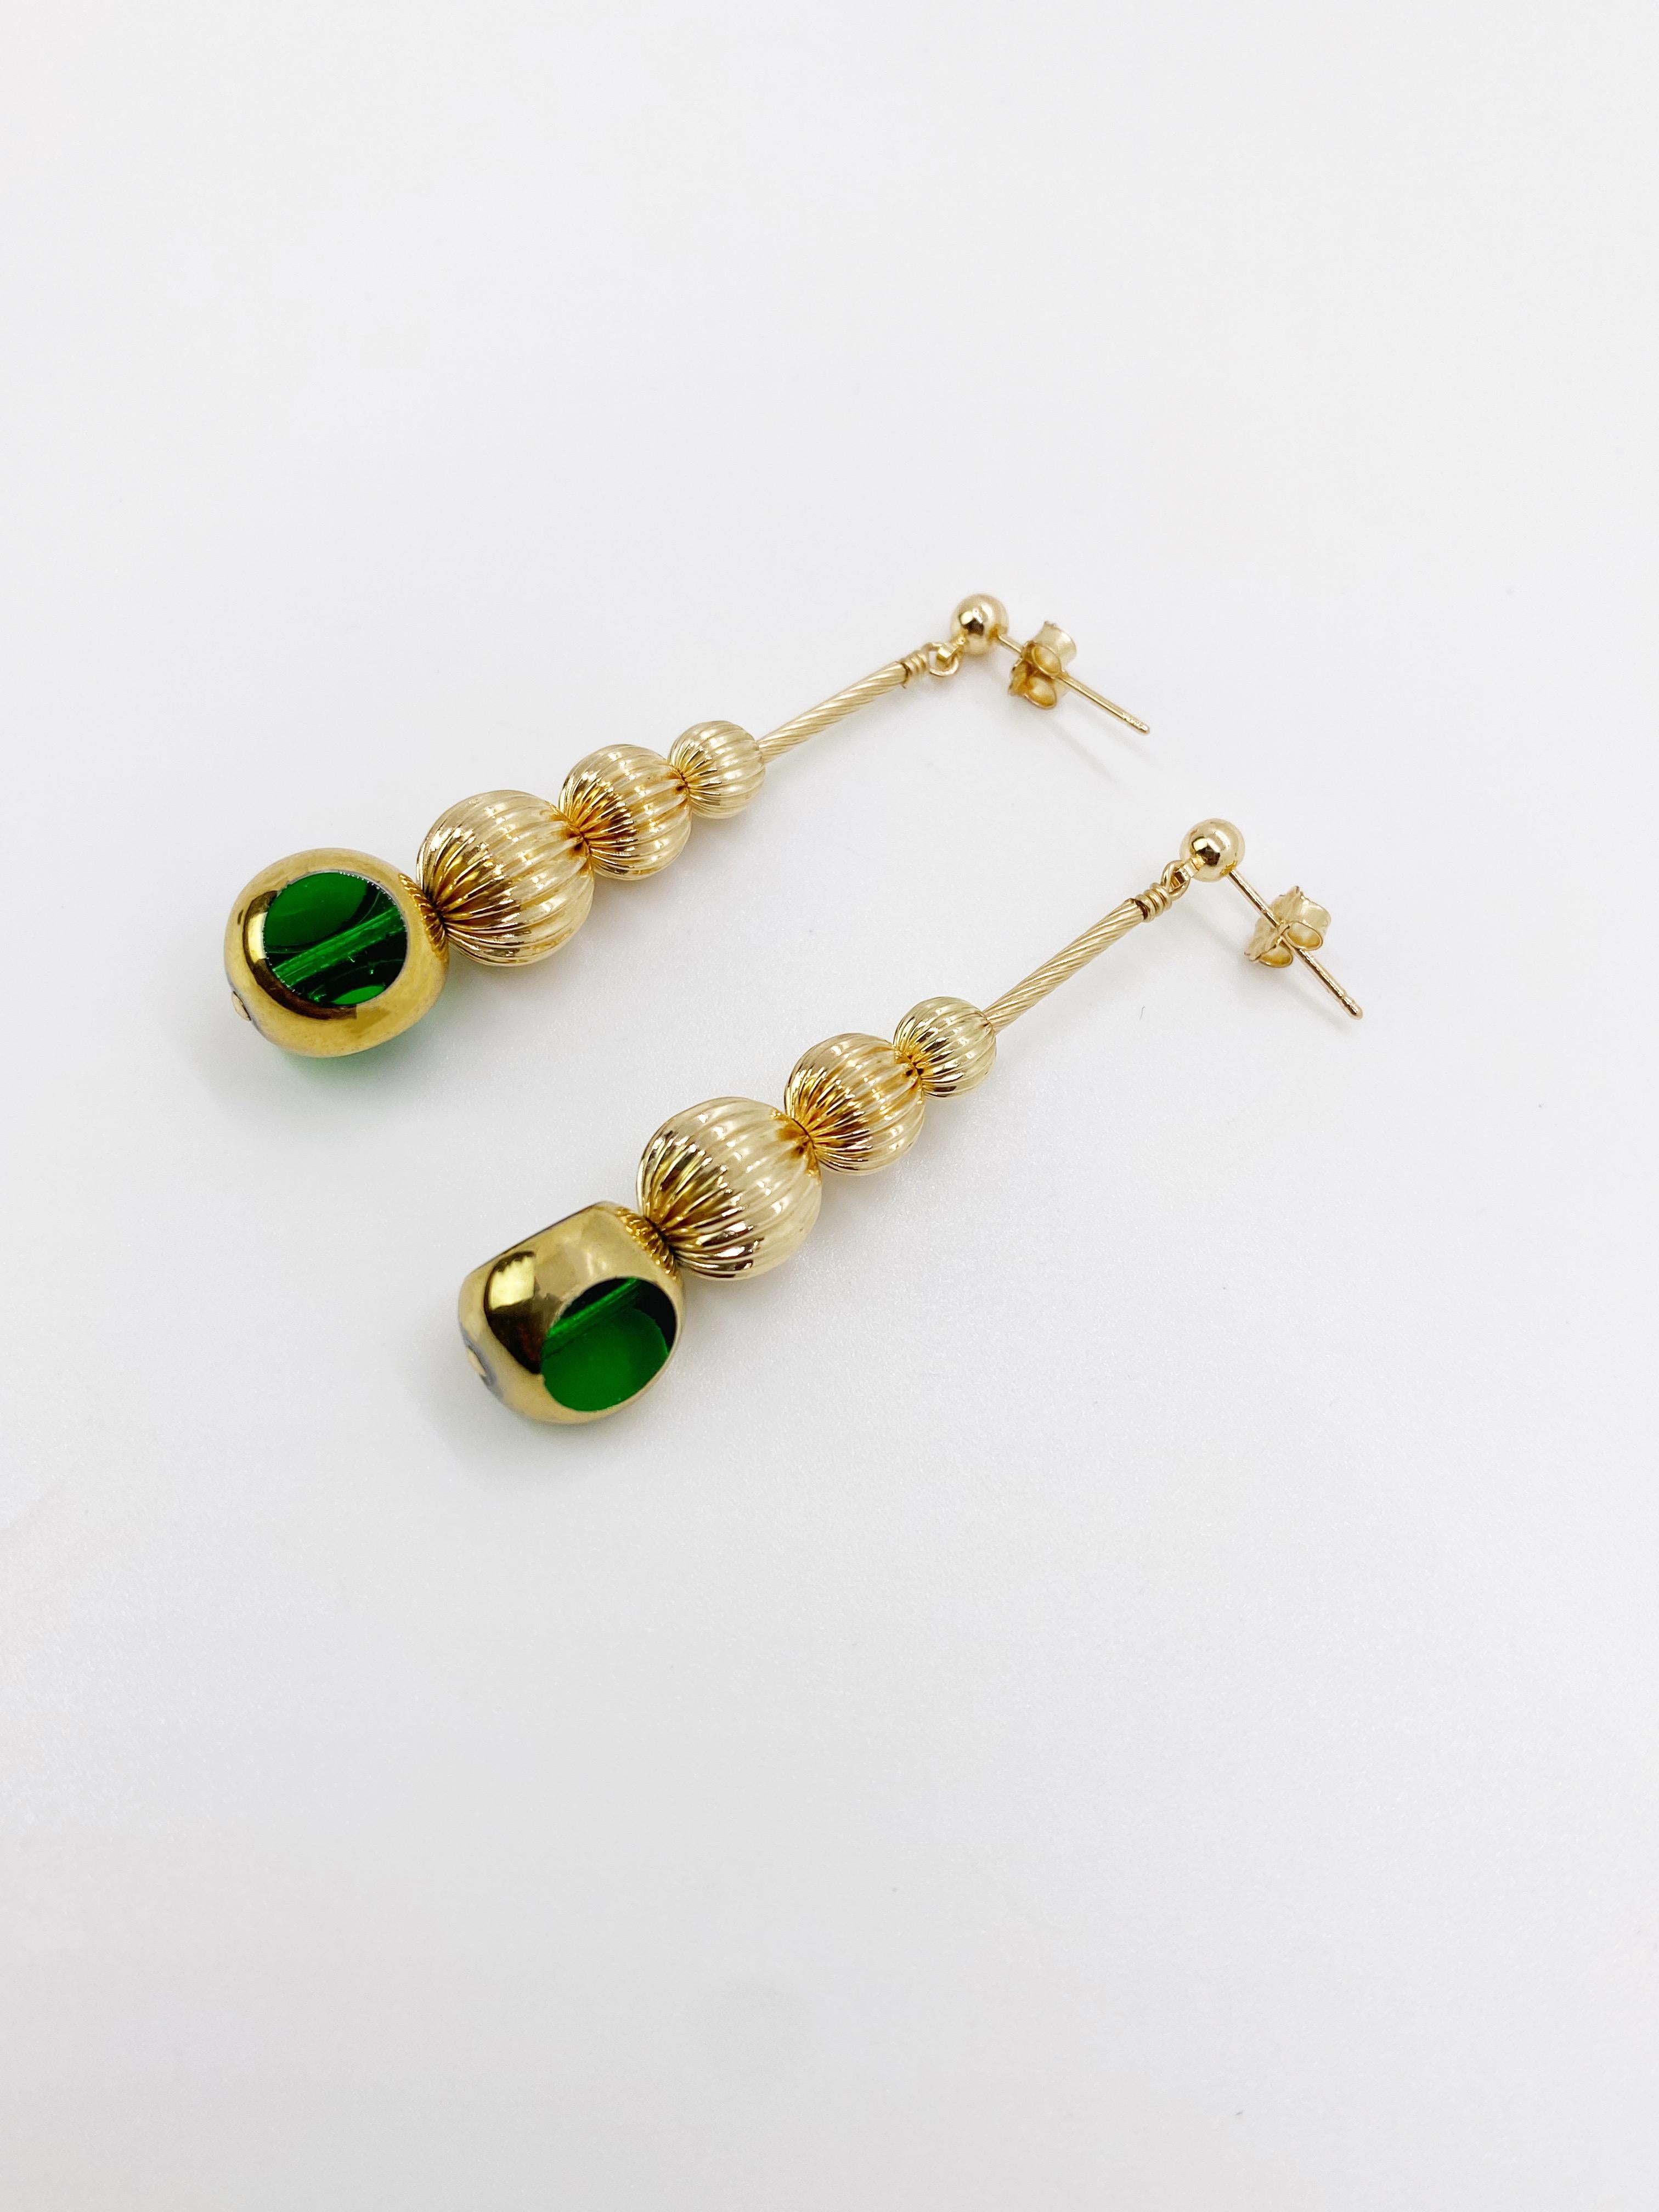 Green Semi Round German Beads Disco Earrings In New Condition For Sale In Monrovia, CA